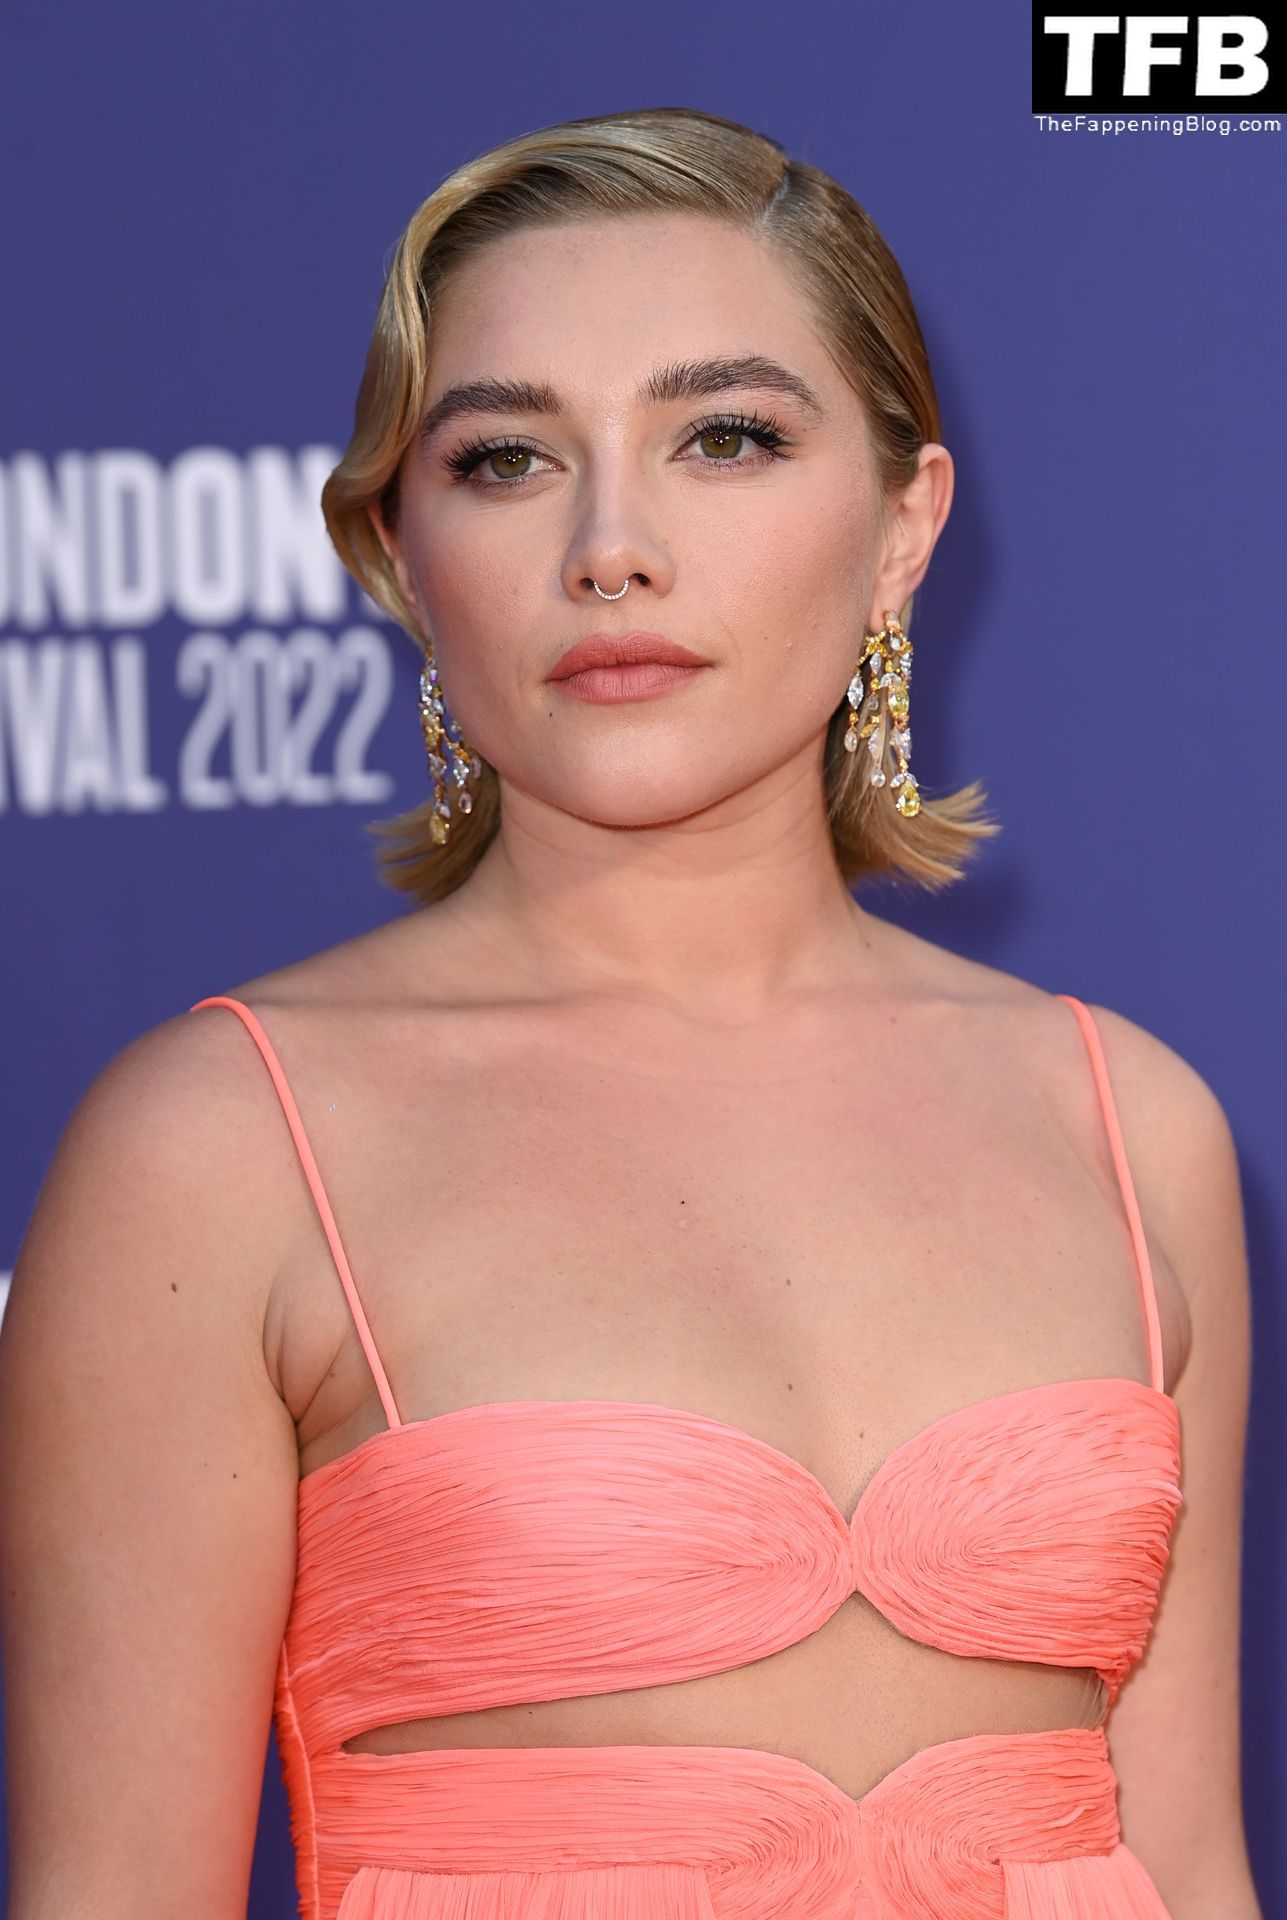 Florence-Pugh-Sexy-The-Fappening-Blog-40-1.jpg